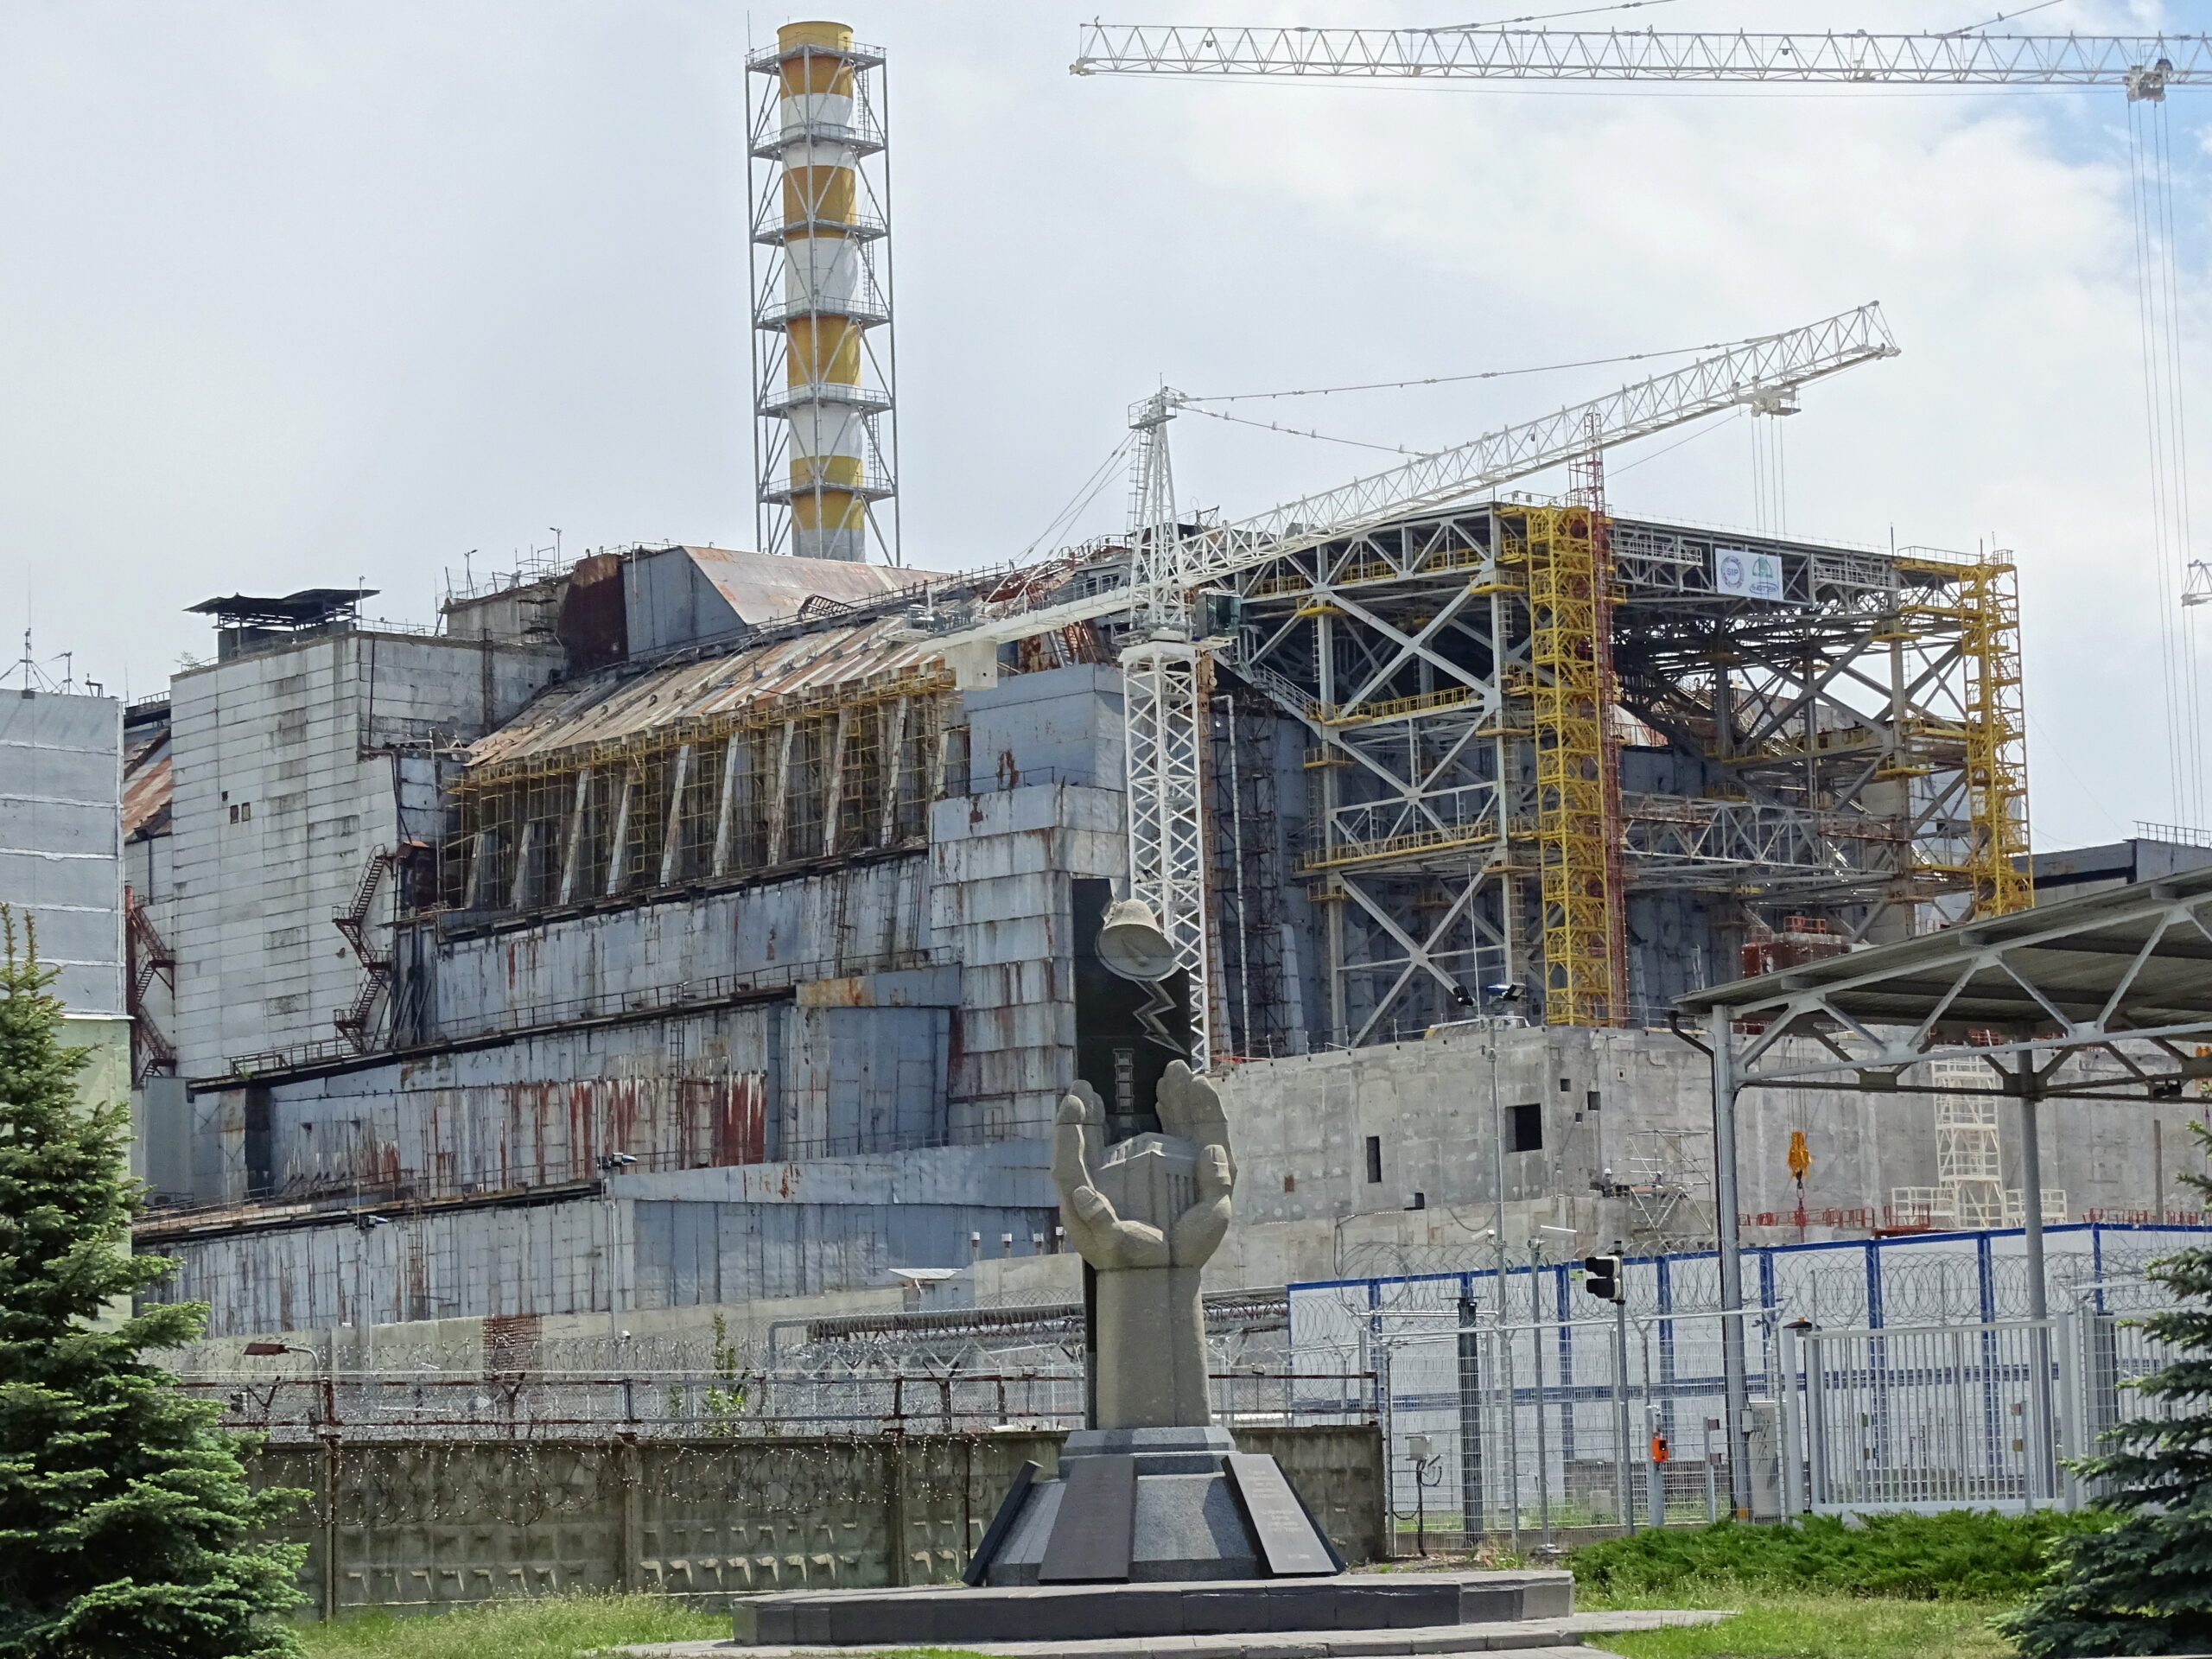 Chernobyl Disaster Featured image